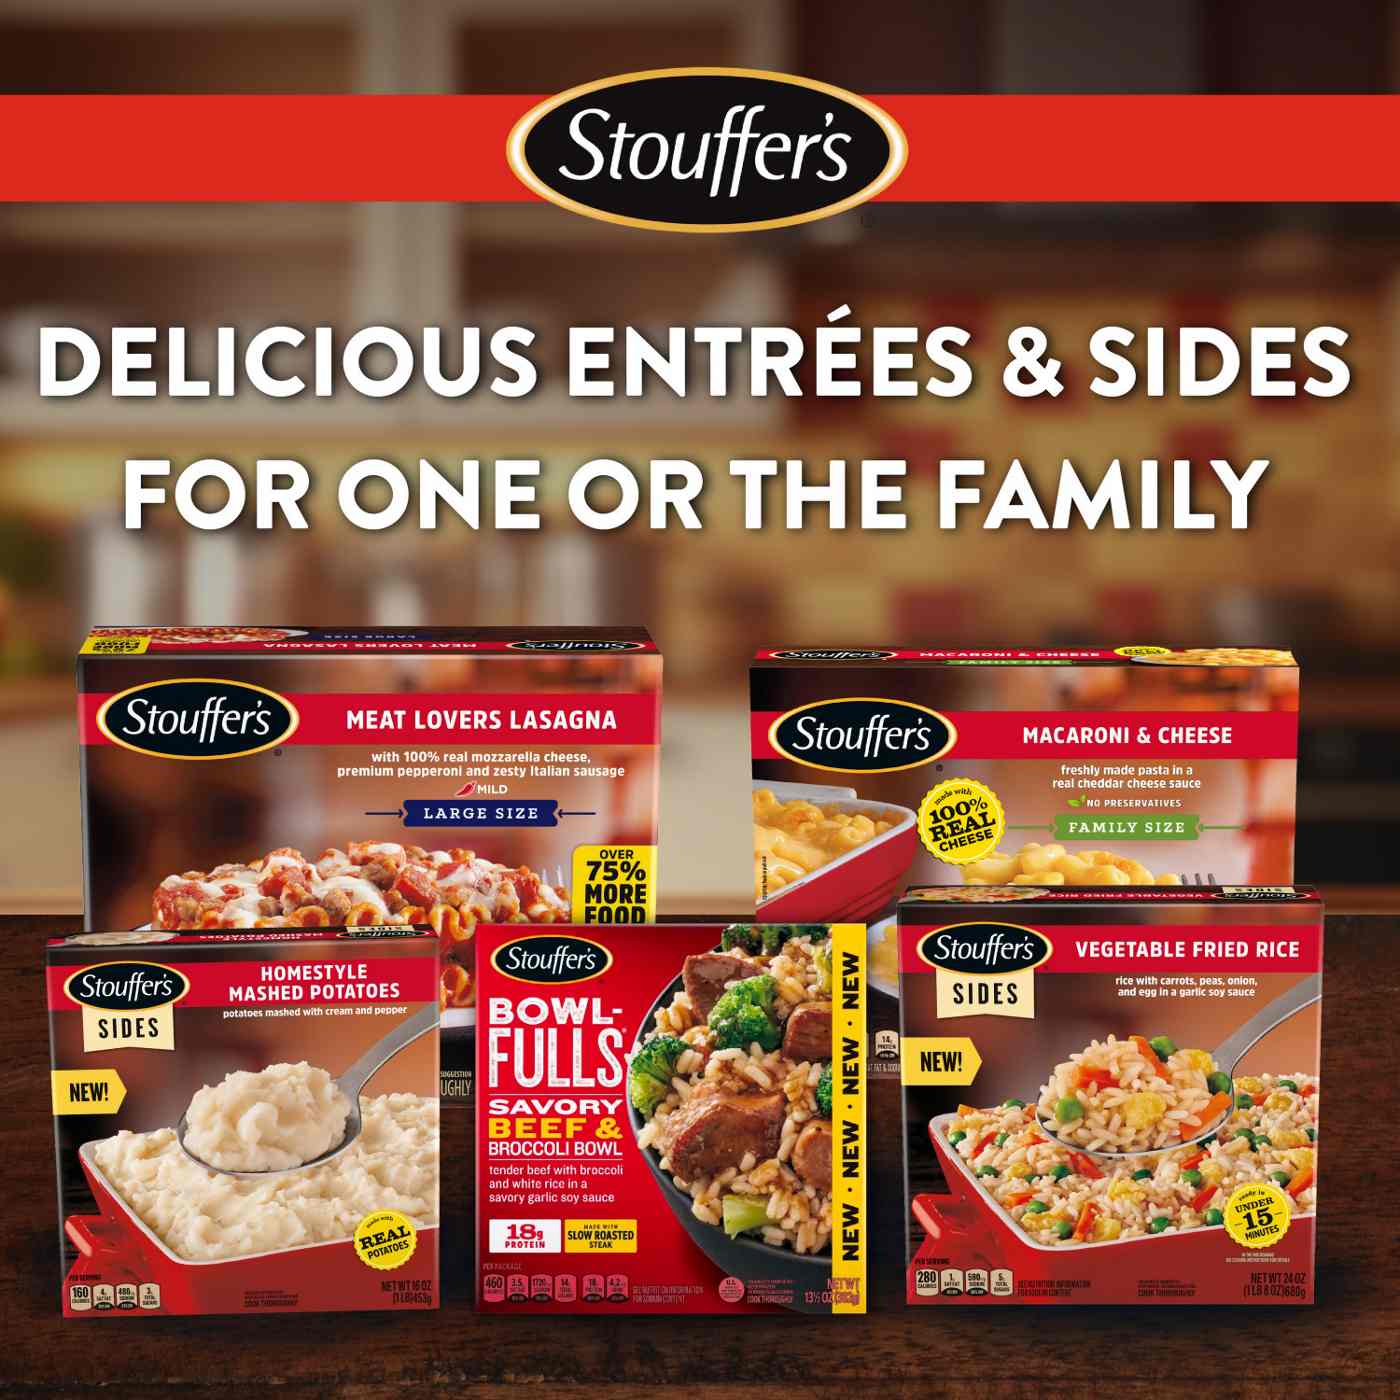 Stouffer's Frozen Meat Lovers Lasagna - Large Size; image 6 of 7